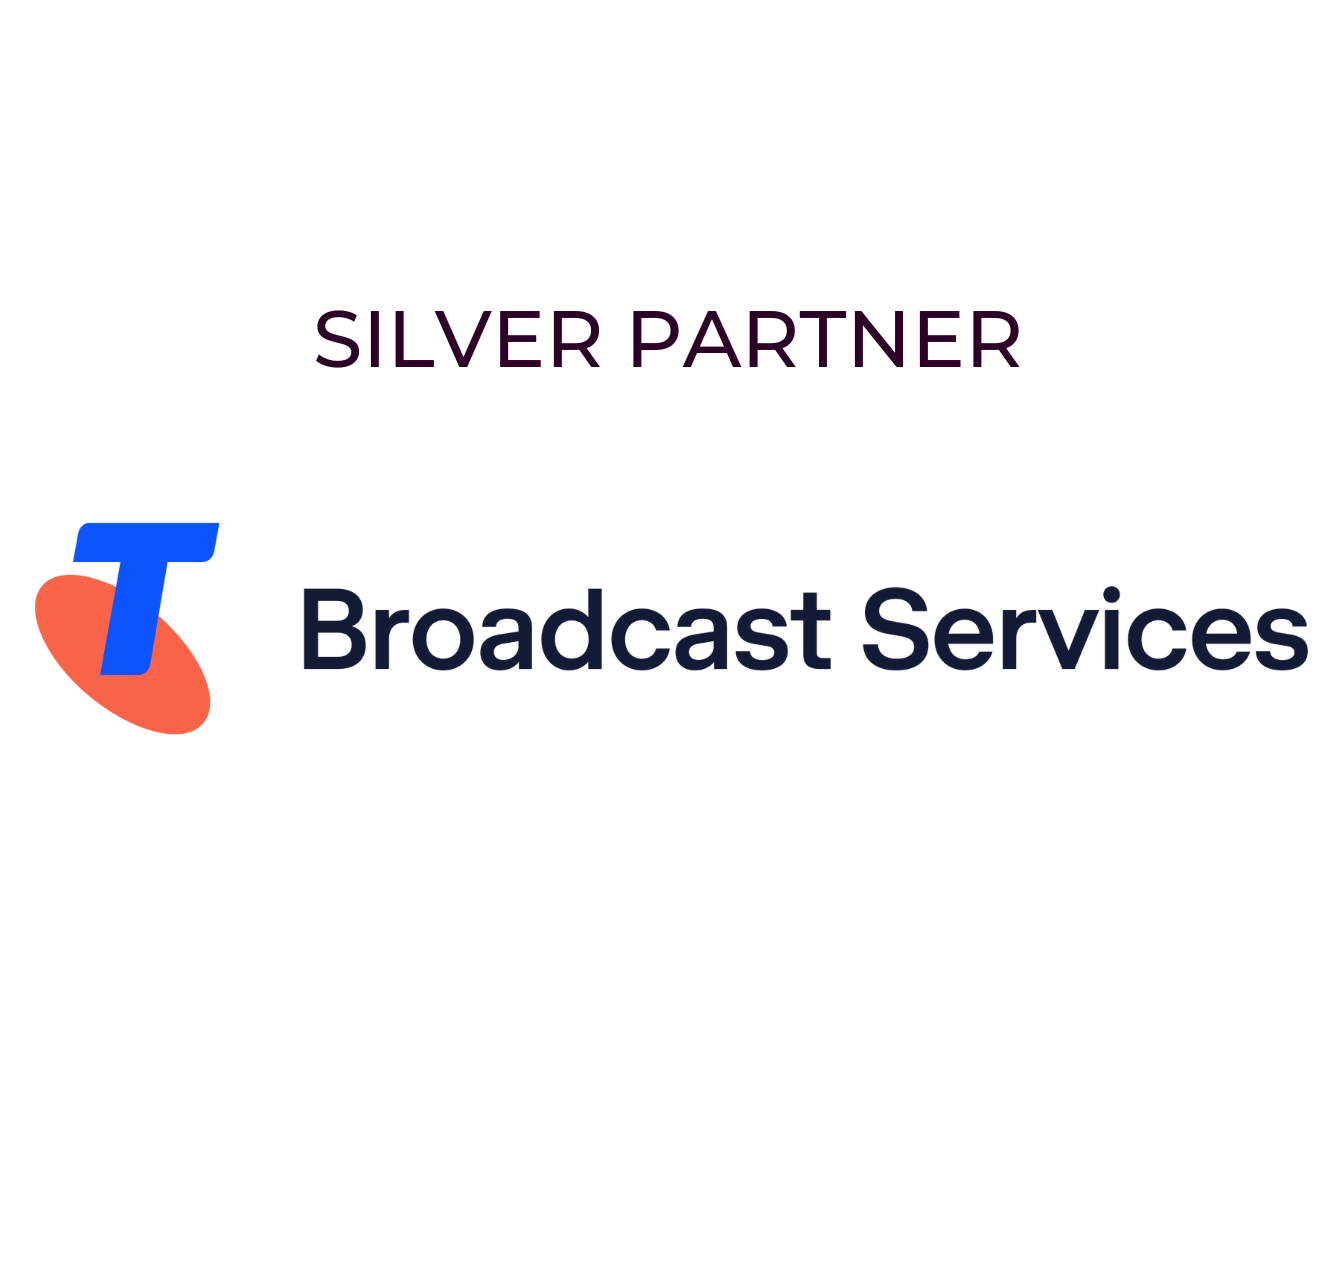 Telstra Broadcasting Services image